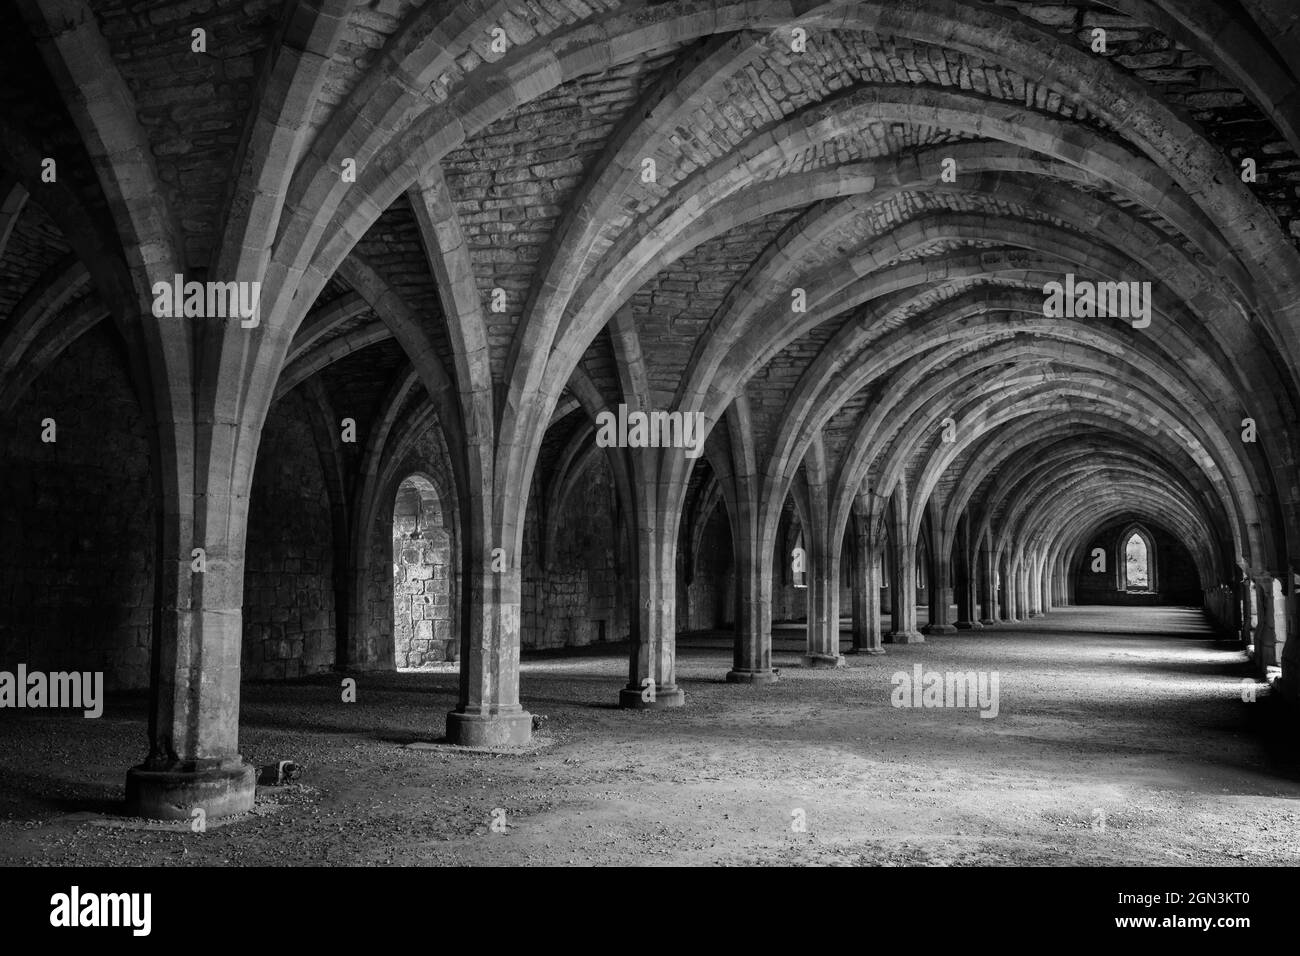 The beautiful columns and vaulted roof of the cellarium at Fountains Abbey Stock Photo